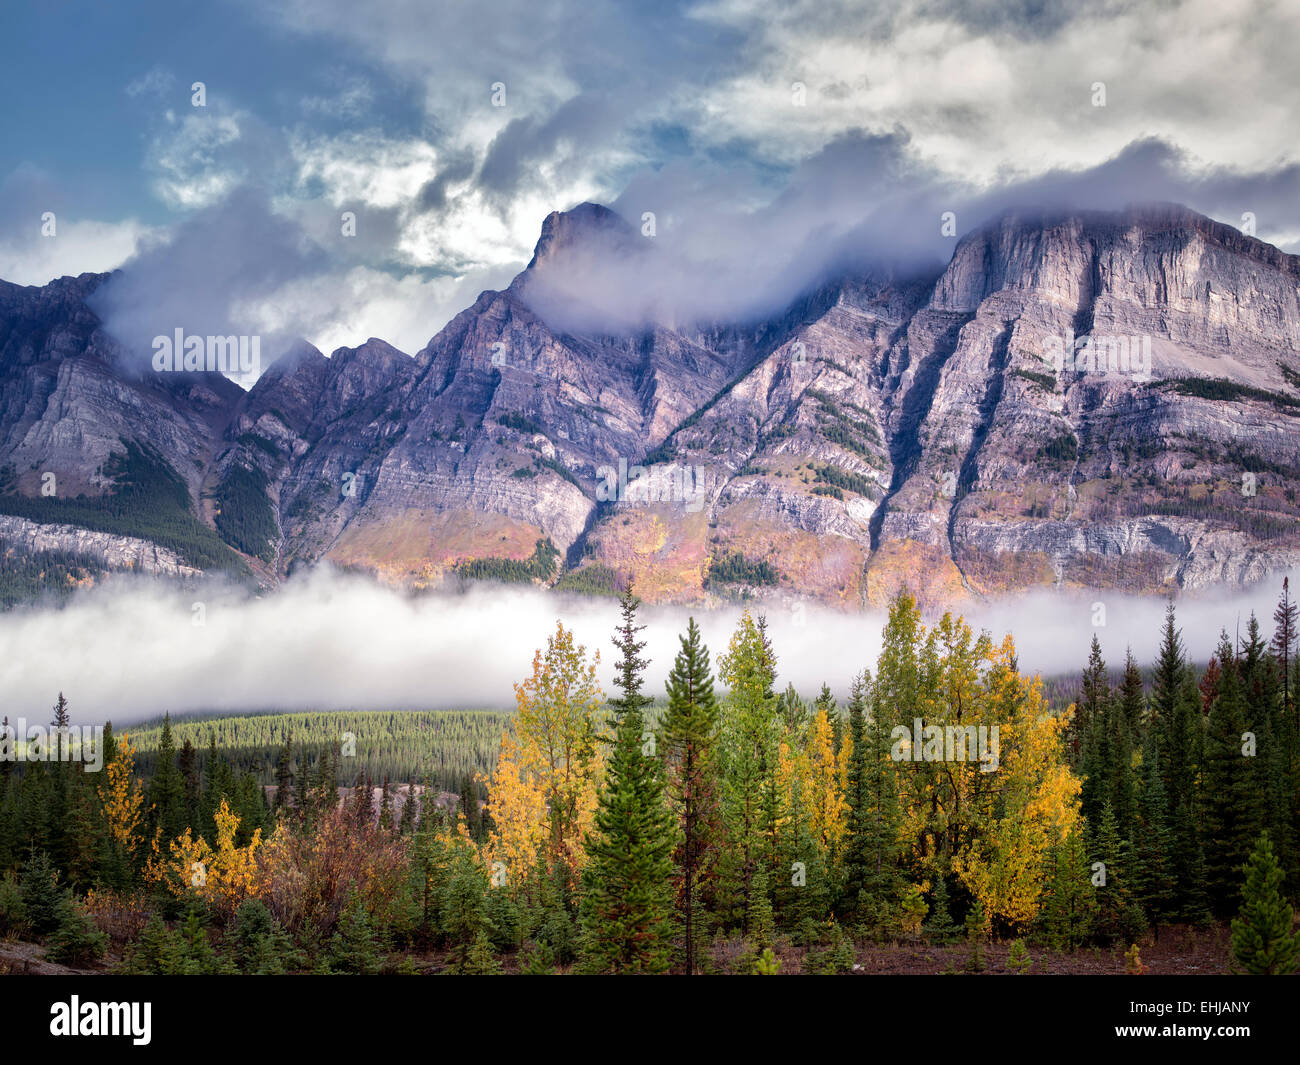 Fog and low clouds with autumn colors. Banff National Park. Alberta, Canada Stock Photo